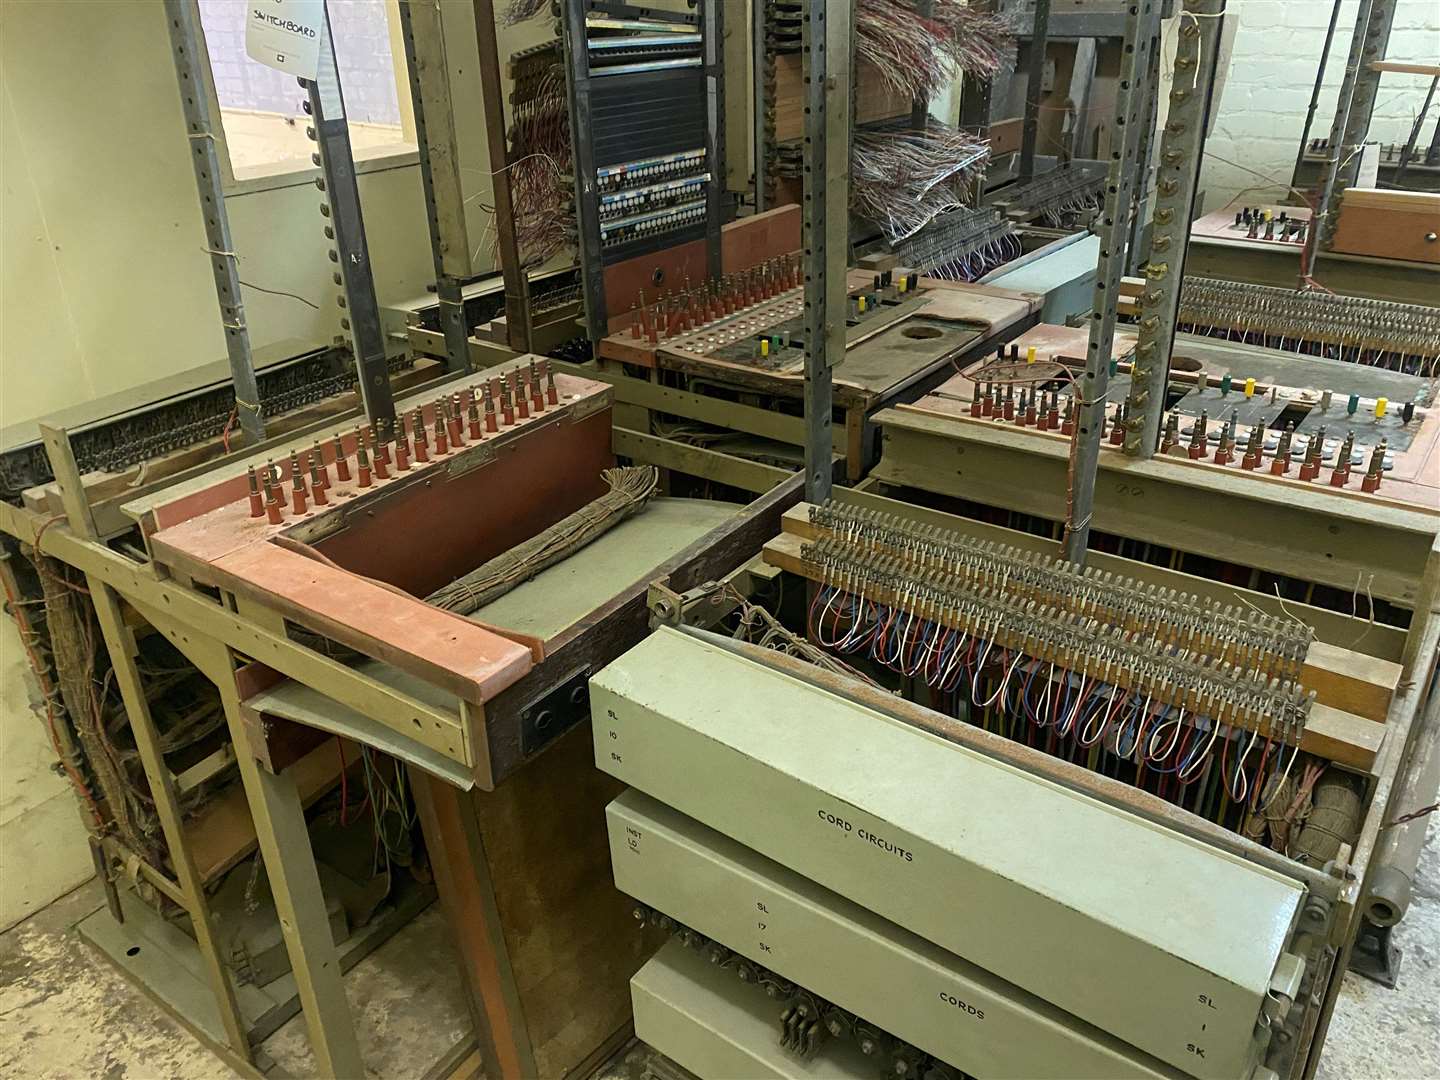 Switchboards have been stuck down in Dumpy since the Second World War